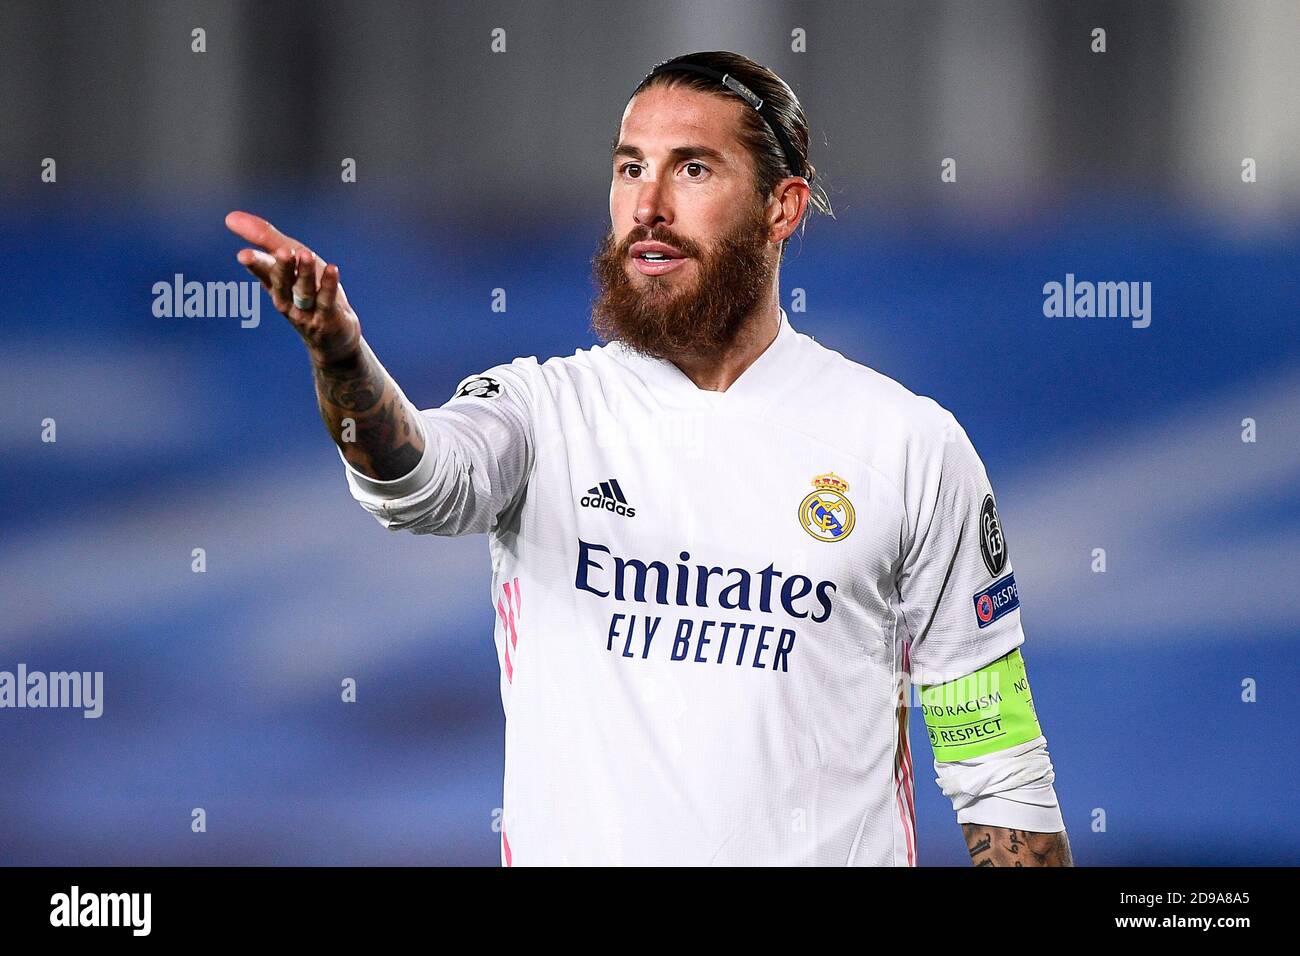 Madrid, Spain - 03 November, 2020: Sergio Ramos of Real Madrid CF gestures  during the Champions League Group B football match between Real Madrid CF  and FC Internazionale. Real Madrid CF won